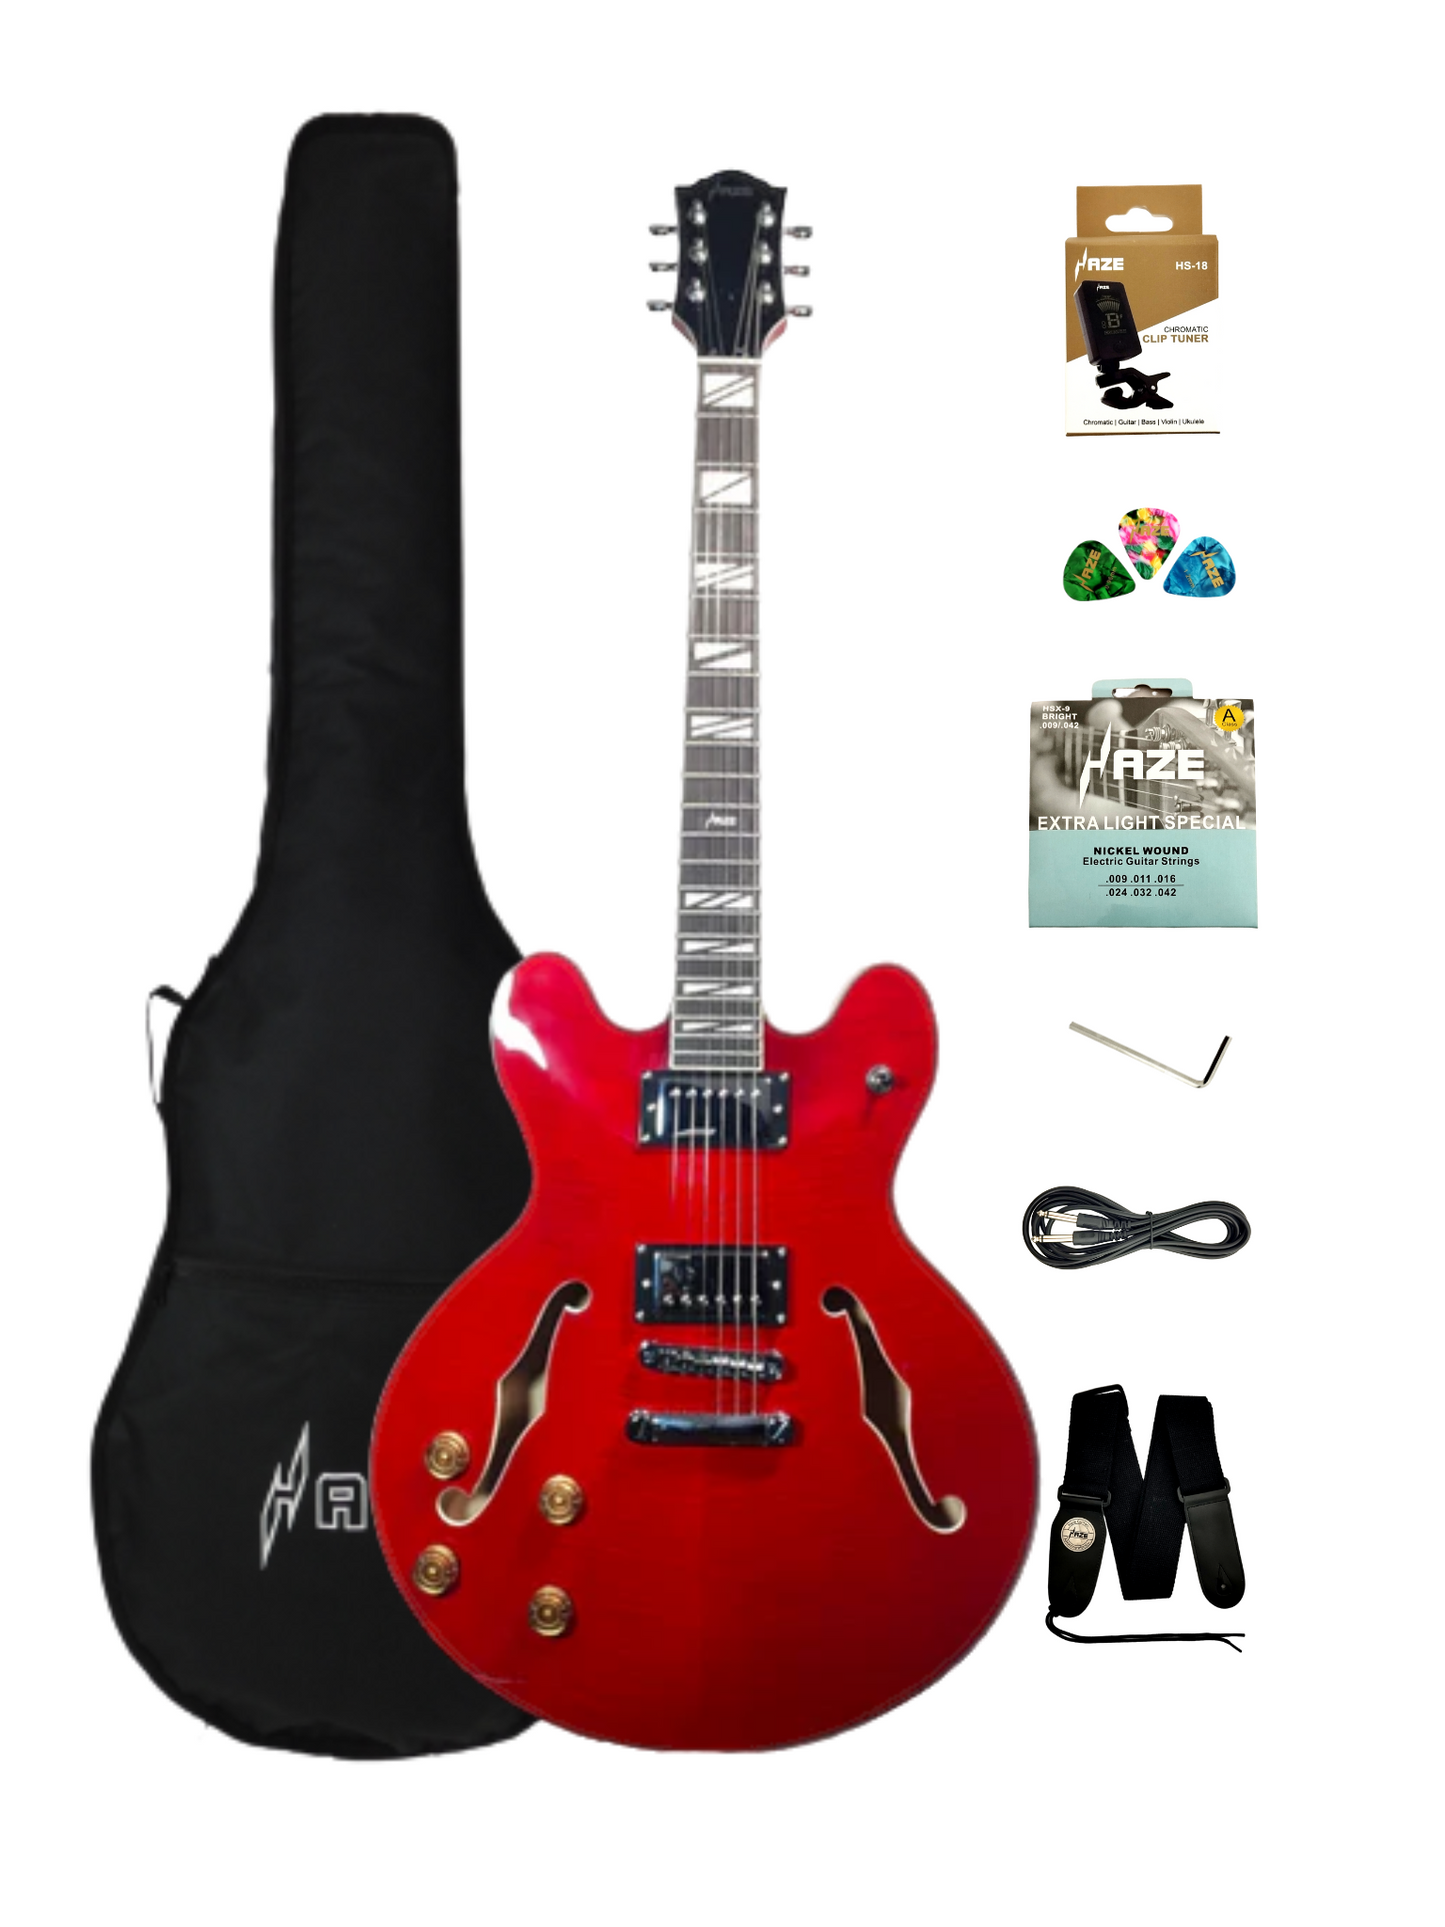 Haze Semi-Hollow Flame Maple HES Electric Guitar - Red SEG272CRLH